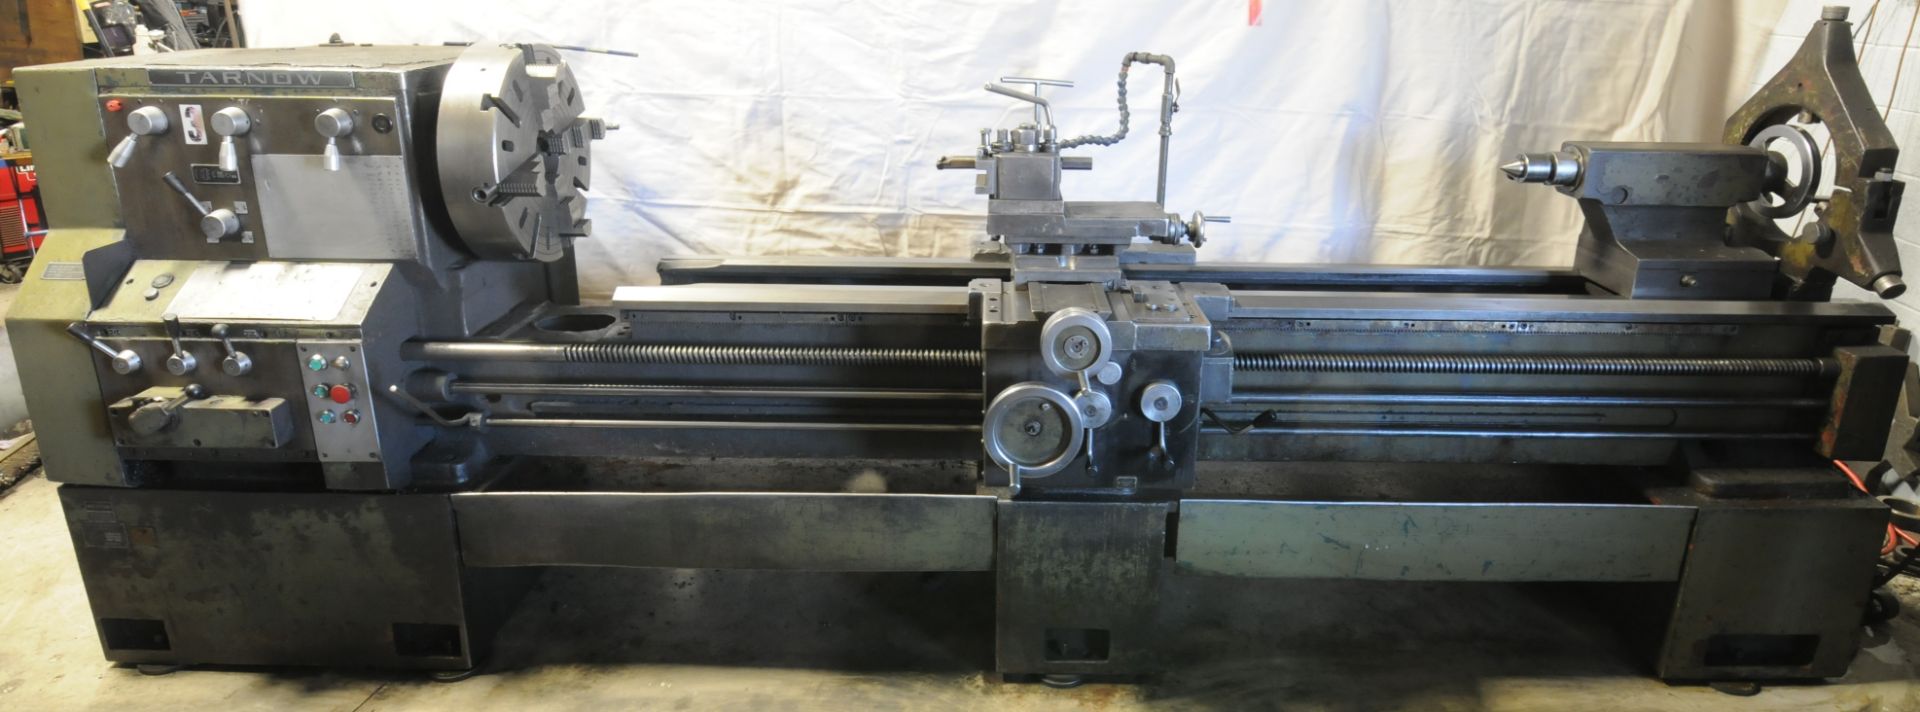 TARNOW TUJ 50M X 2500 GAP BED ENGINE LATHE WITH 24" SWING, 100" BETWEEN CENTERS, 3.5" BORE, SPEEDS